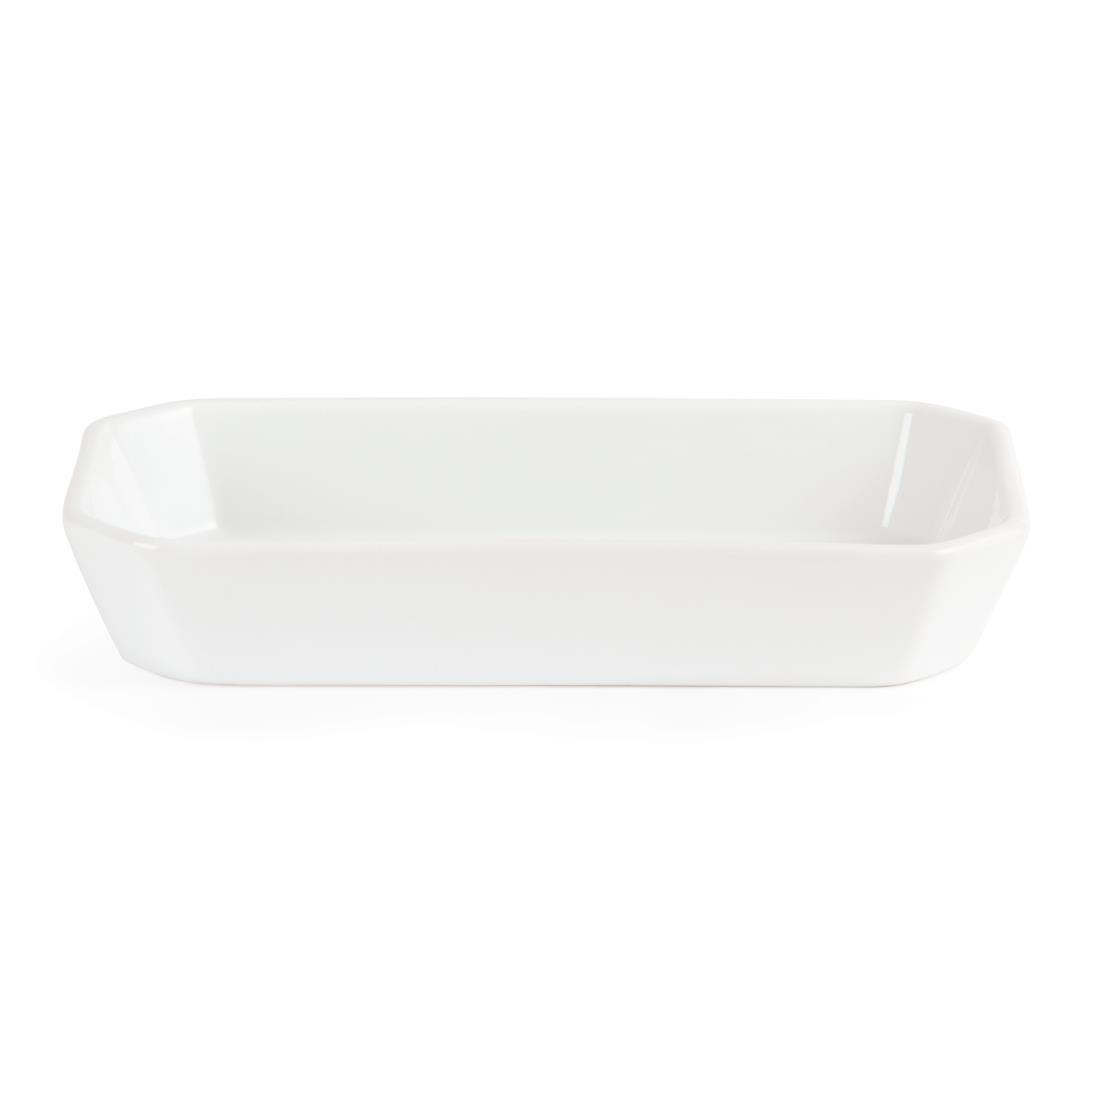 Olympia Whiteware Oblong Hors d'Oeuvre Dishes 235x 122mm (Pack of 6) - W438  - 3